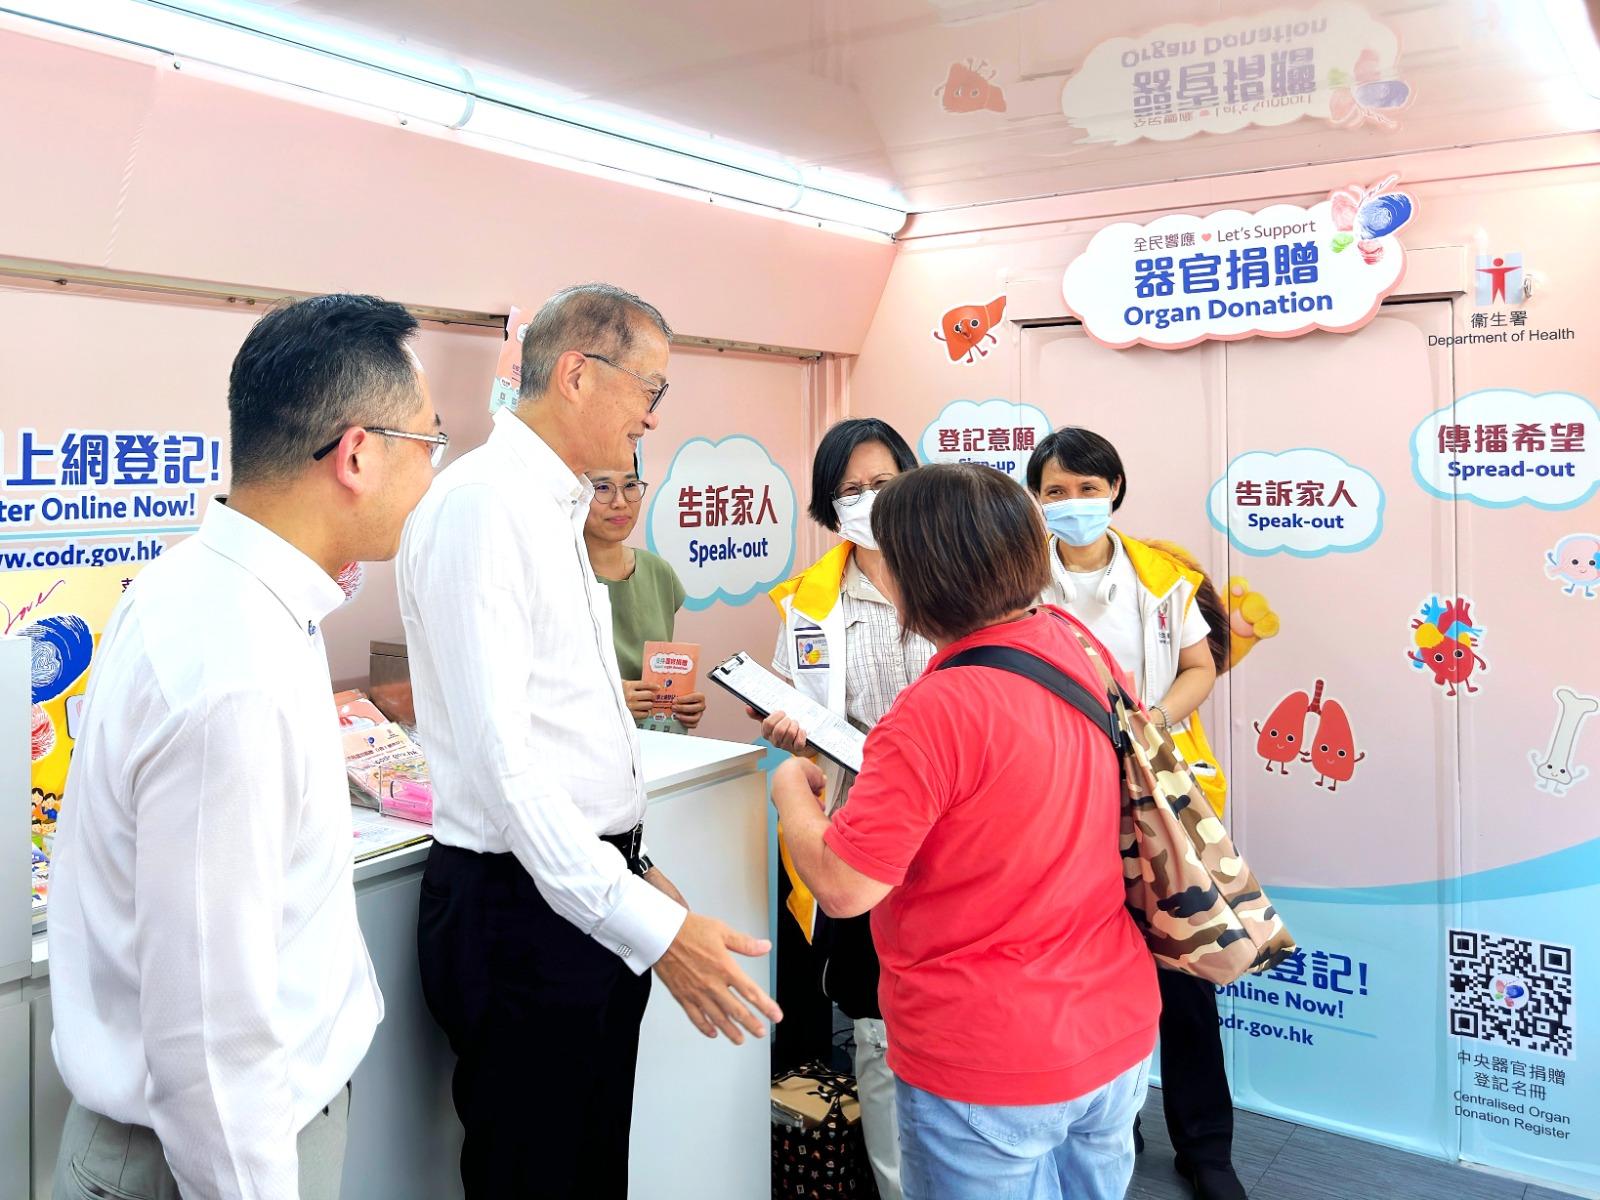 The Department of Health today (August 16) launched the organ donation promotion vehicle. The organ donation promotion vehicle parked at Hennessy Road, Wan Chai, on the first day of its launch will visit various locations in Hong Kong in the coming three months to promote organ donations to the public. Photo shows the Secretary for Health, Professor Lo Chung-mau (second left), and the Director of Health, Dr Ronald Lam (first left), on board the promotion vehicle assisting a member of the public to register in the Centralised Organ Donation Register.

